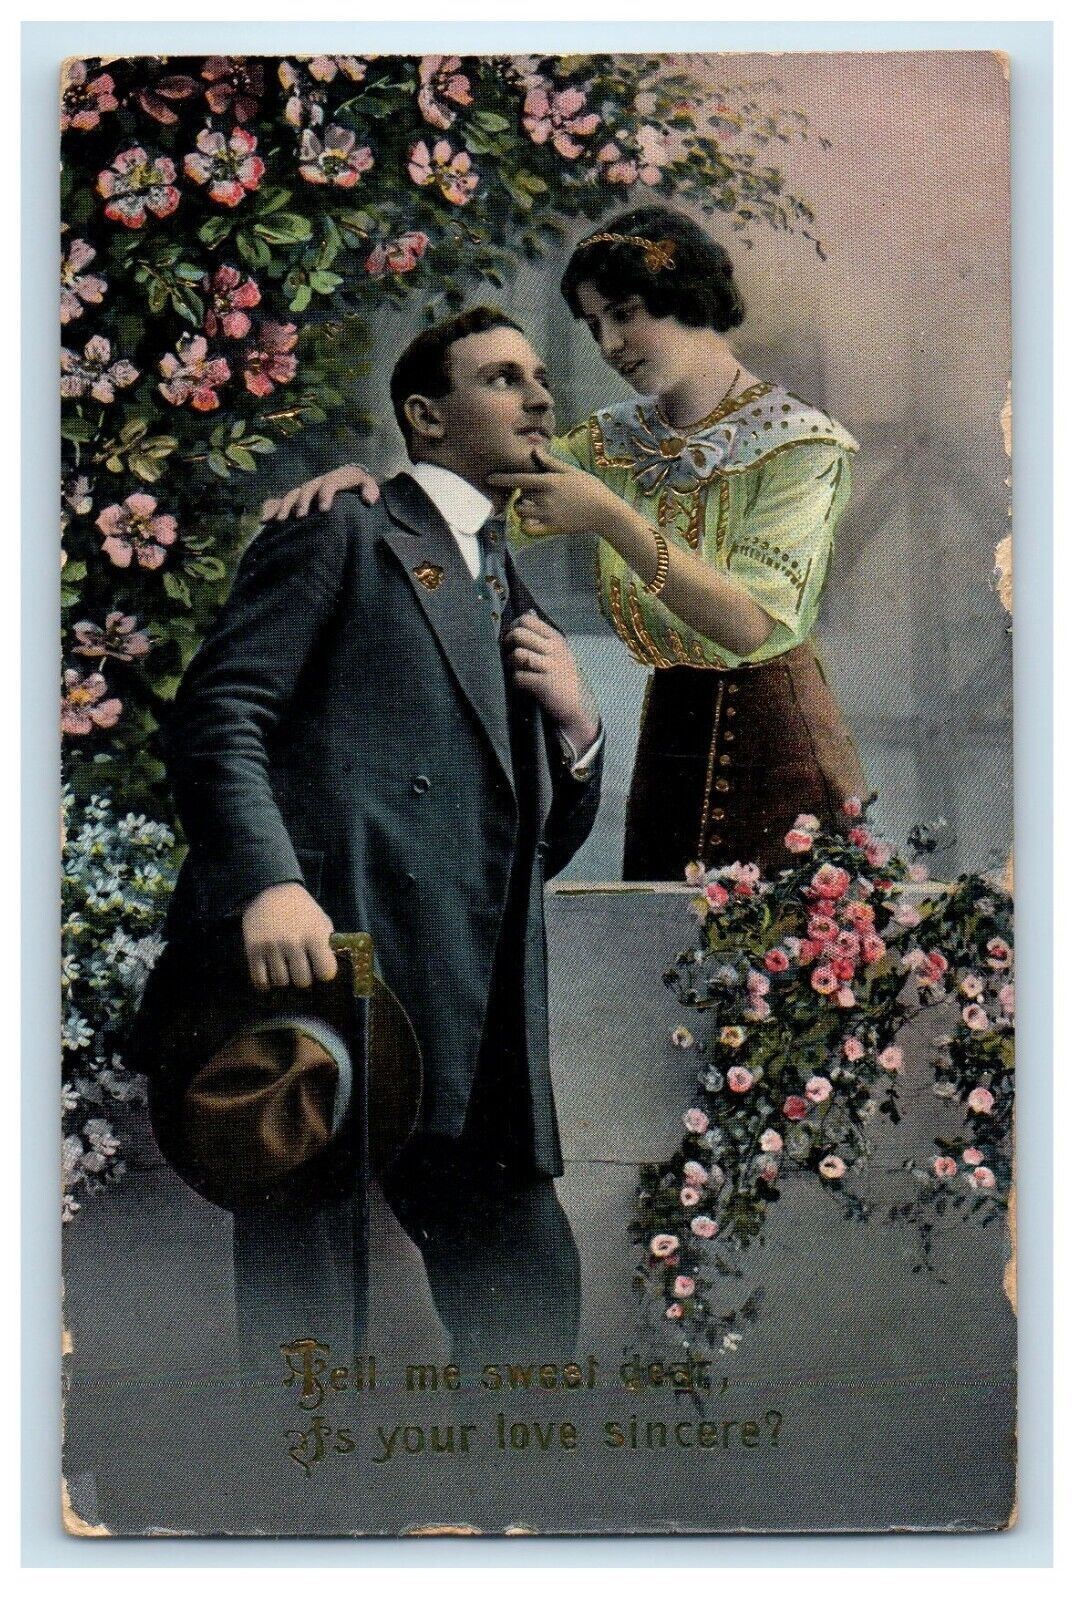 c1910's Couple Dress Up Flowers Gel Gold Gilt Embossed Posted Antique Postcard